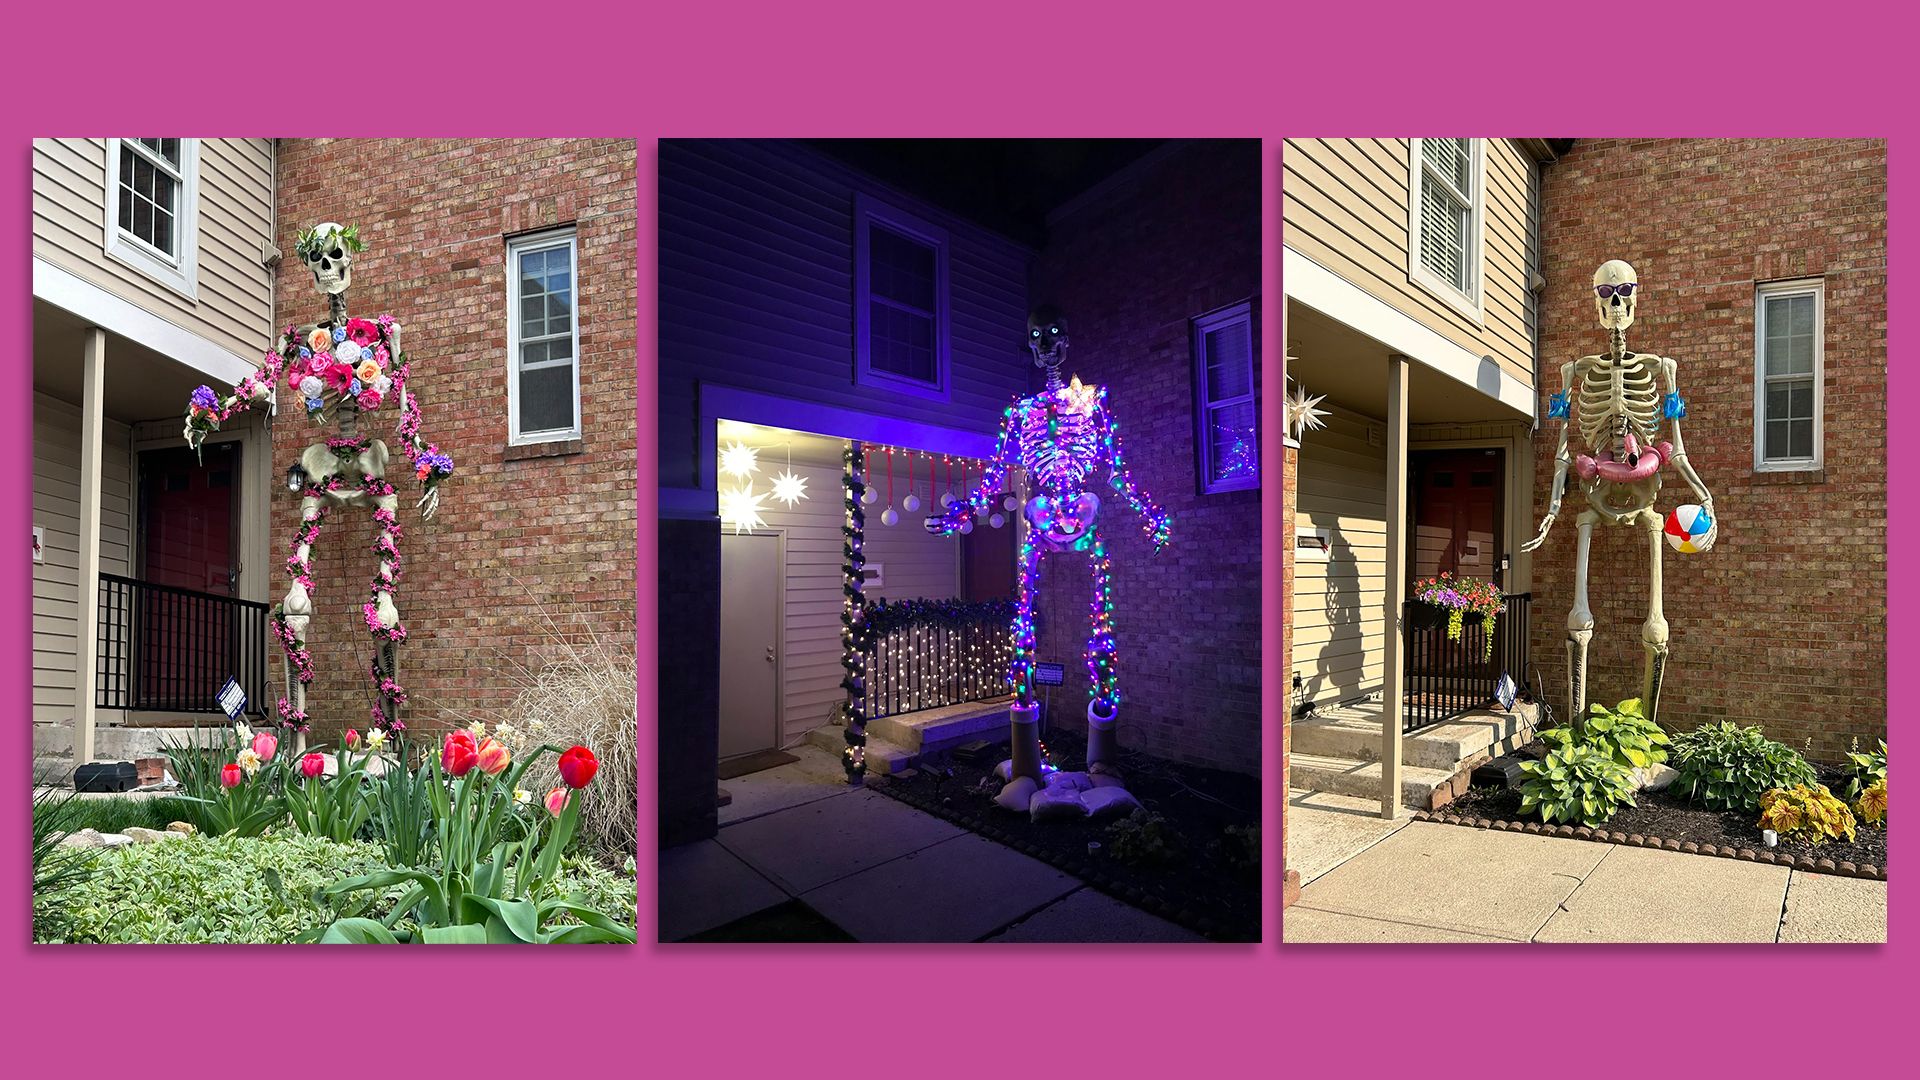 Three photos of a 12-foot skeleton dressed for different seasons — springtime flowers, winter lights and a summer swim